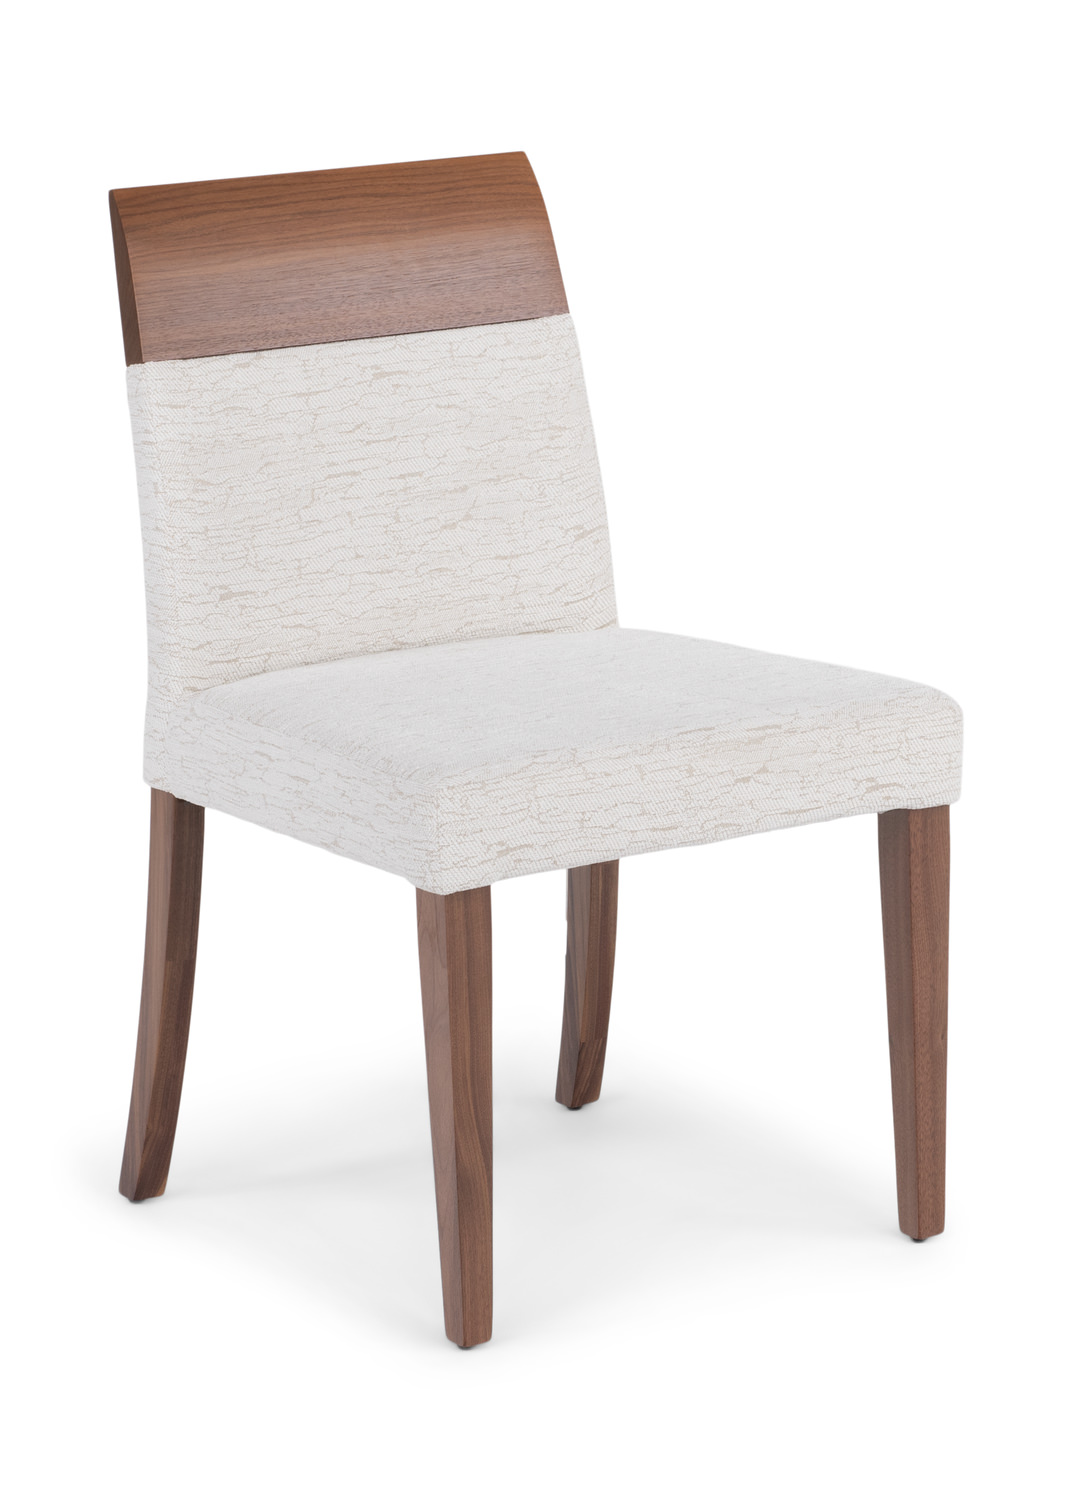 Le Noyer Dining Chair